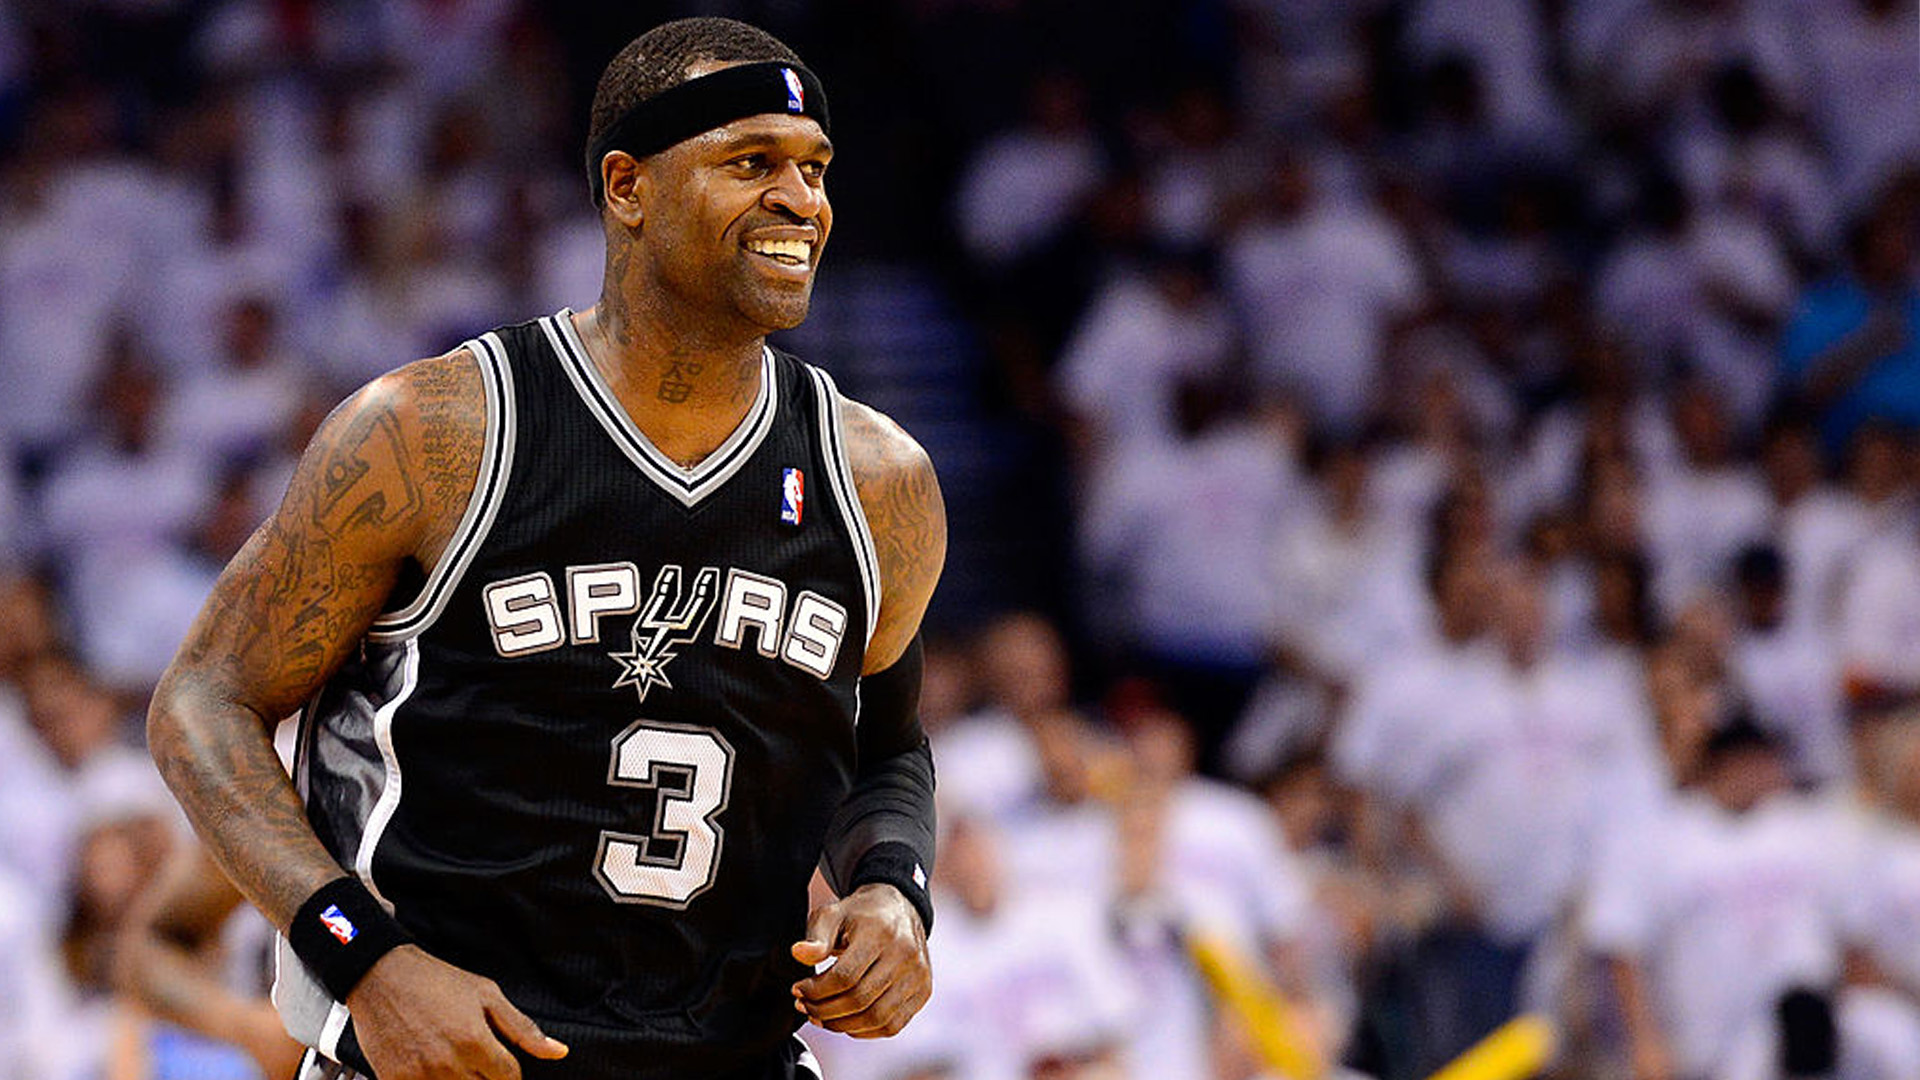 Stephen Jackson Reveals The Amount Of His First NBA Paycheck — And How He Blew It All In A Day